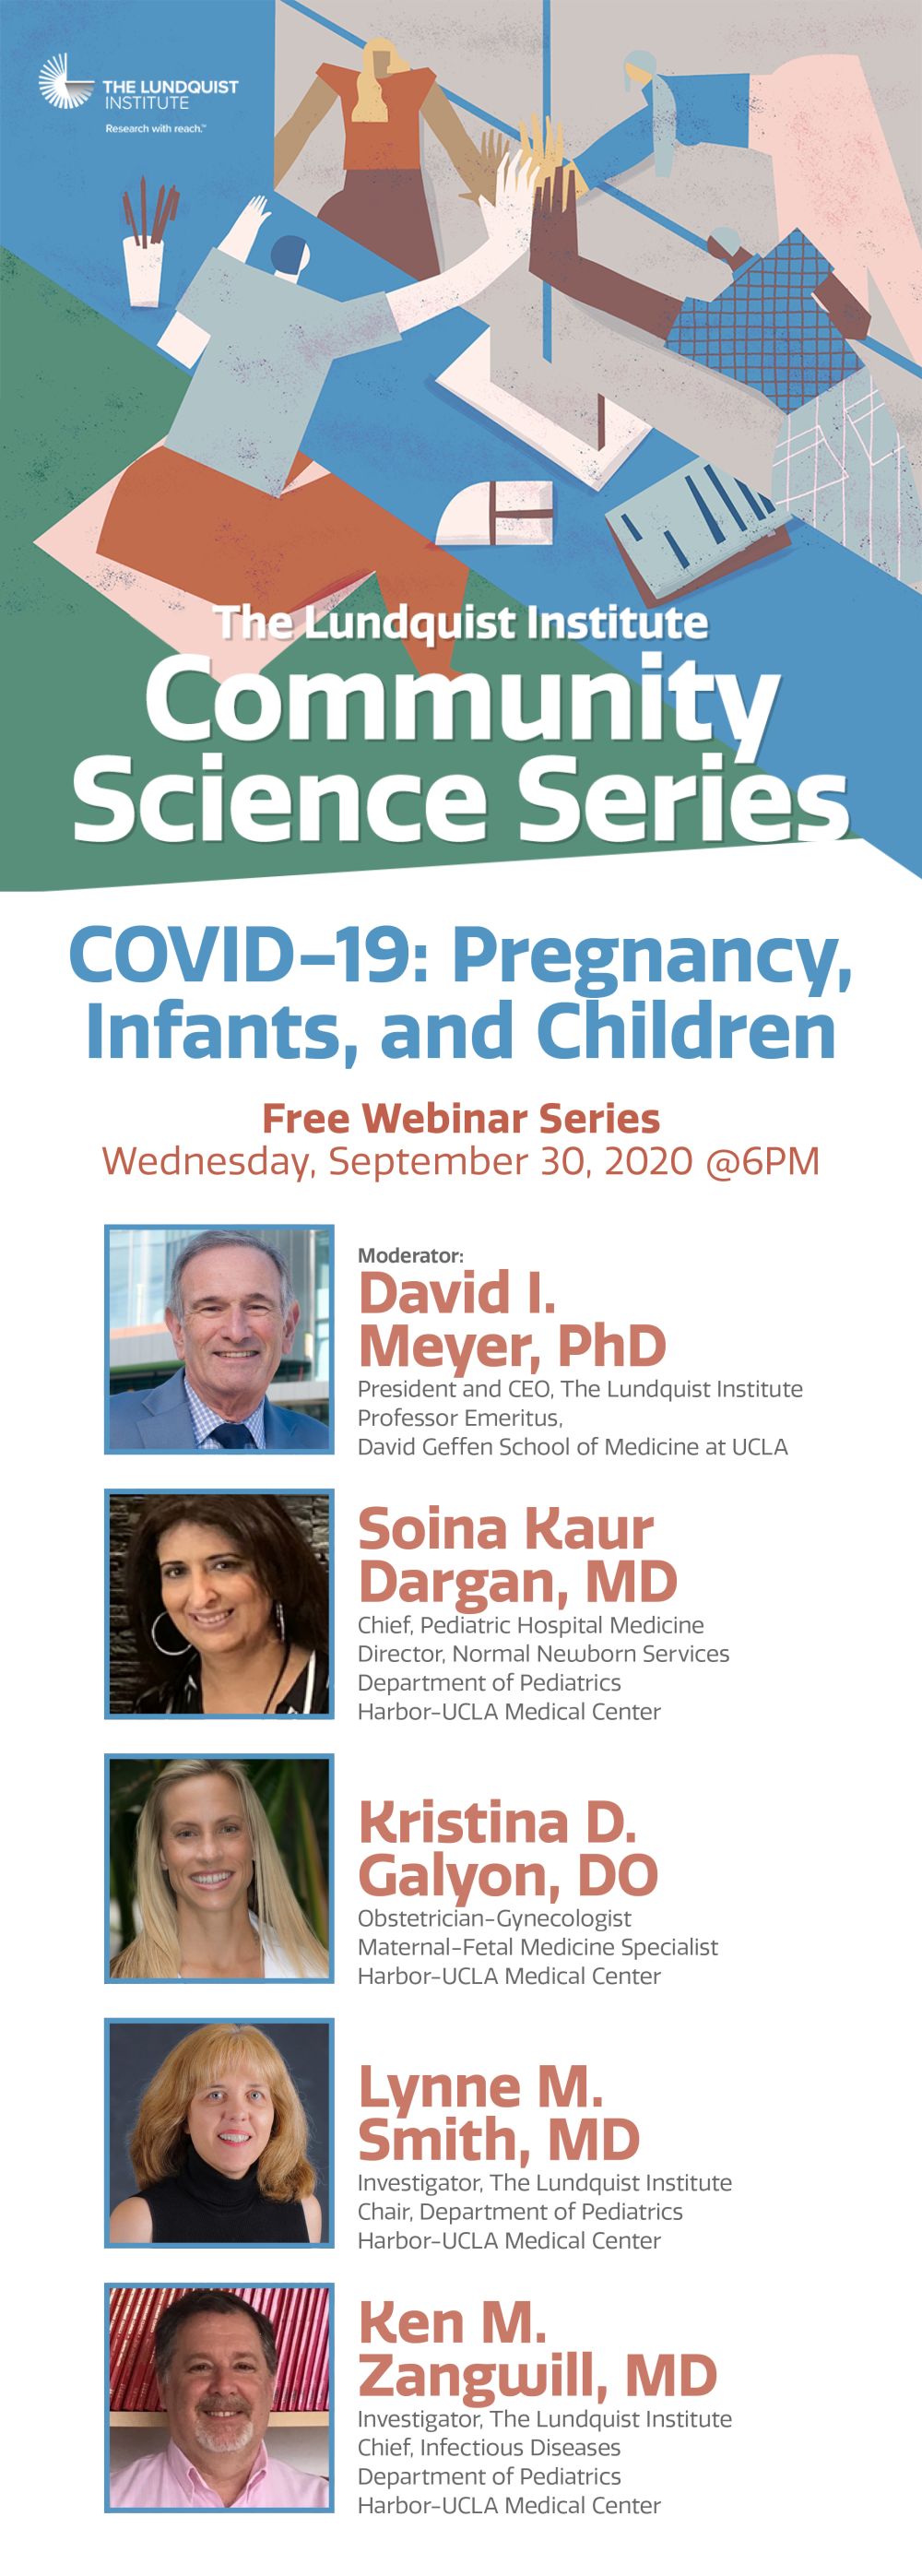 COVID-19: Pregnancy, Infants, and Children